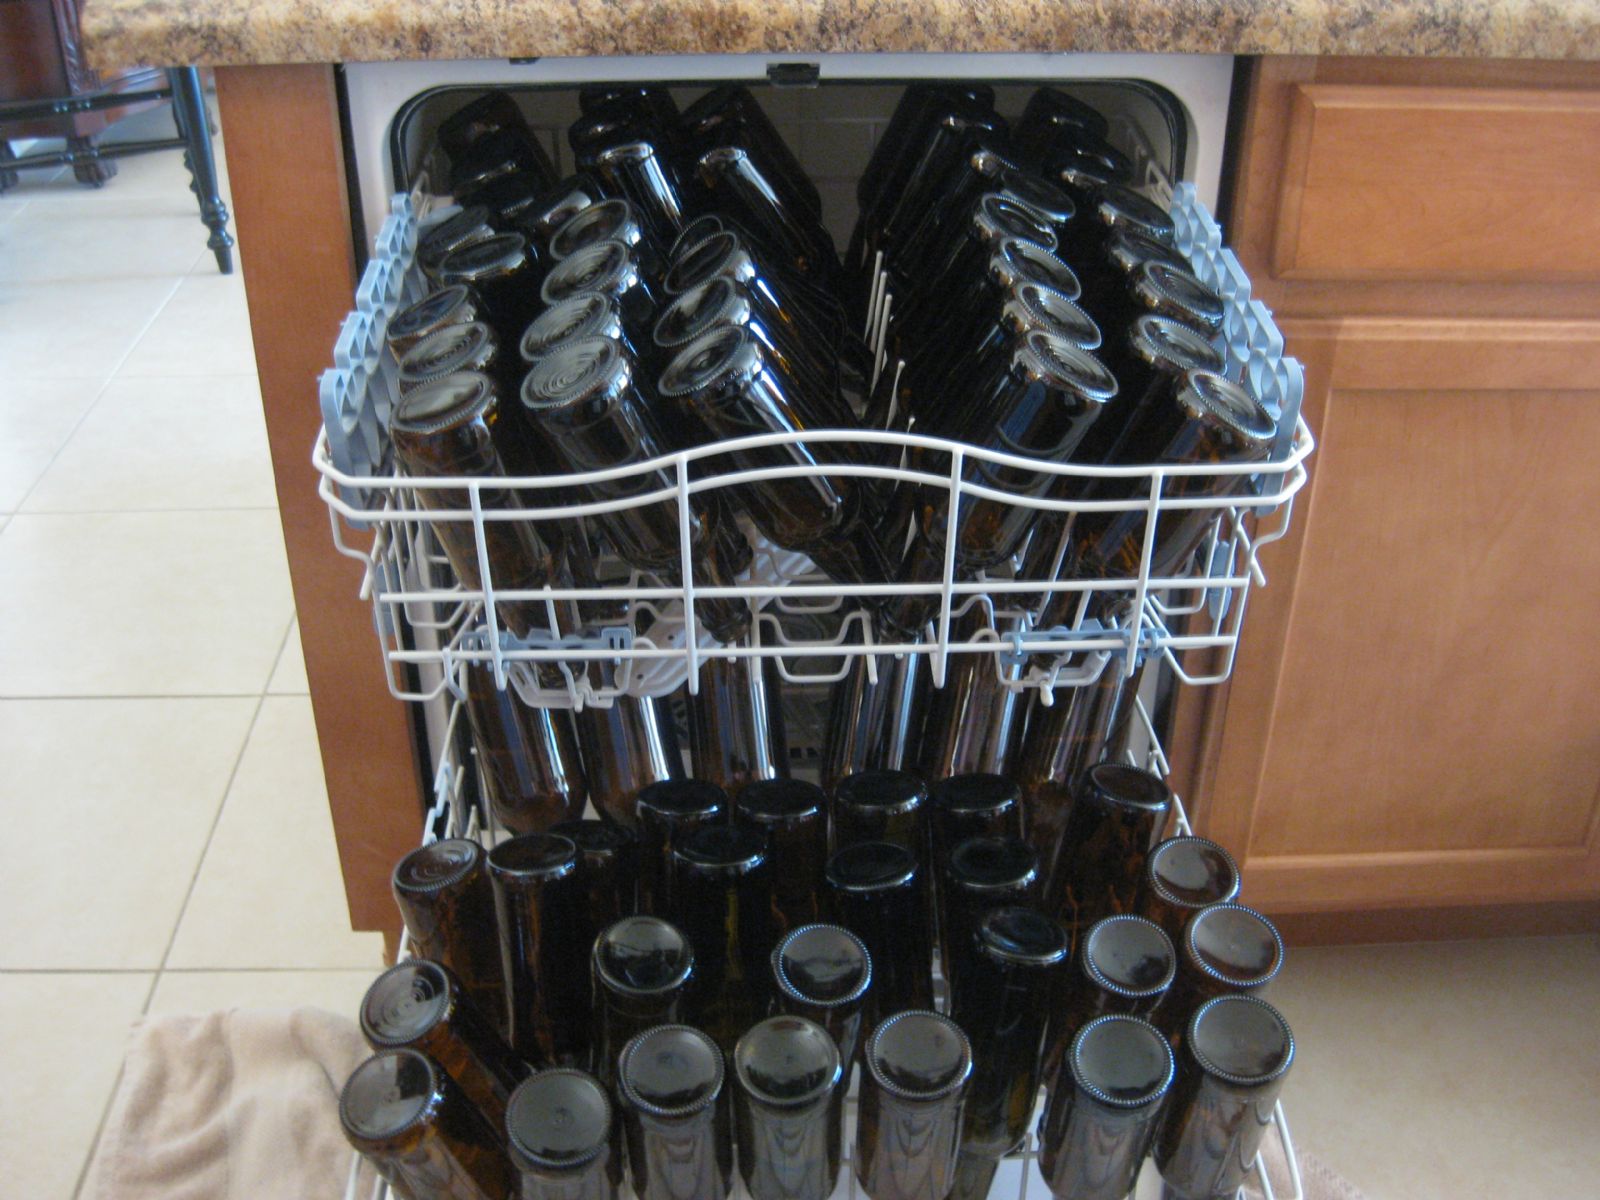 Using a Dish Washer to Clean Beer Bottles